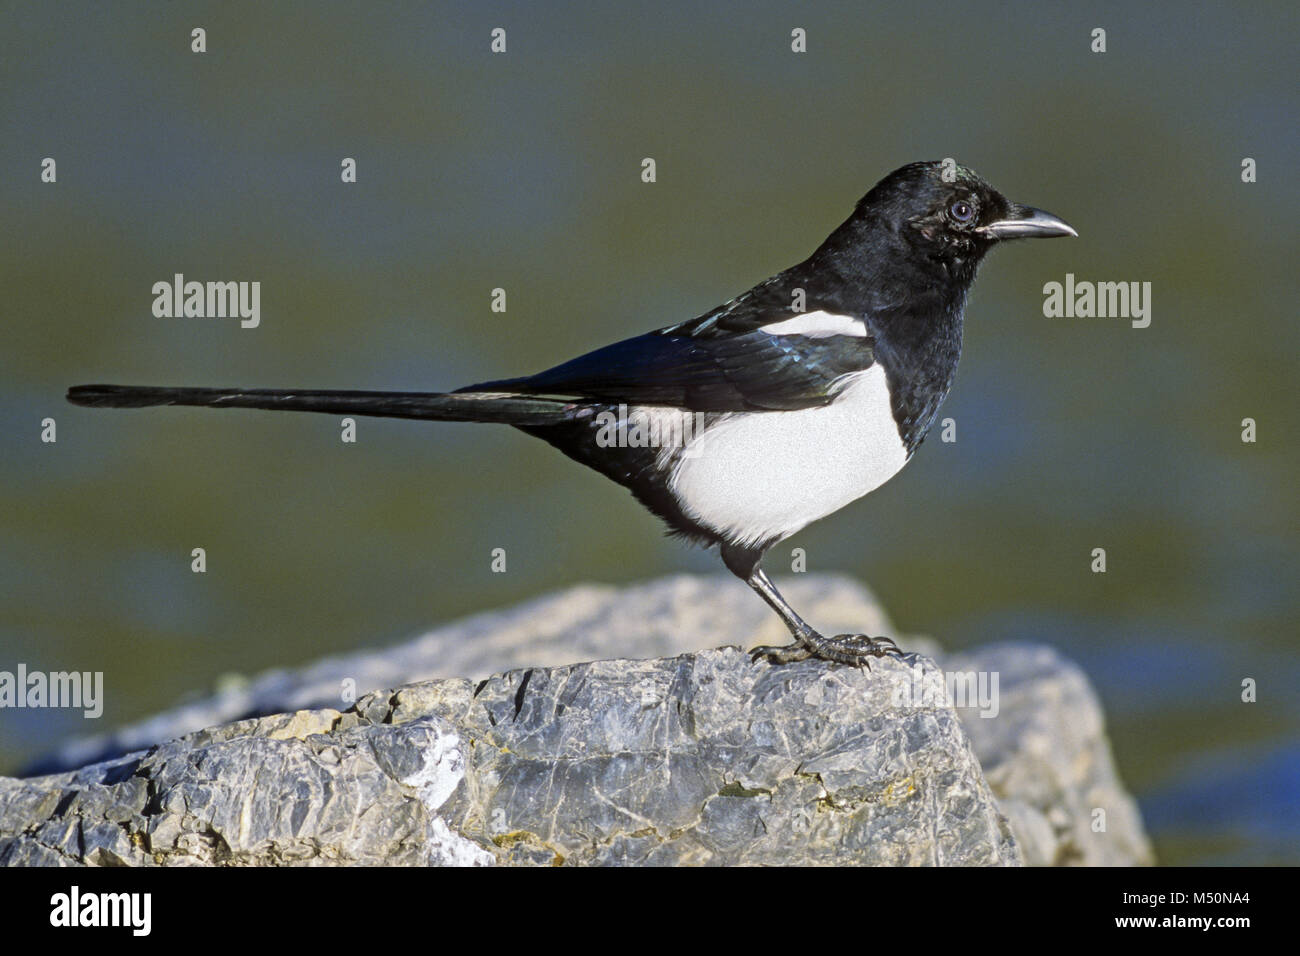 Black-billed Magpie / American Magpie Stock Photo